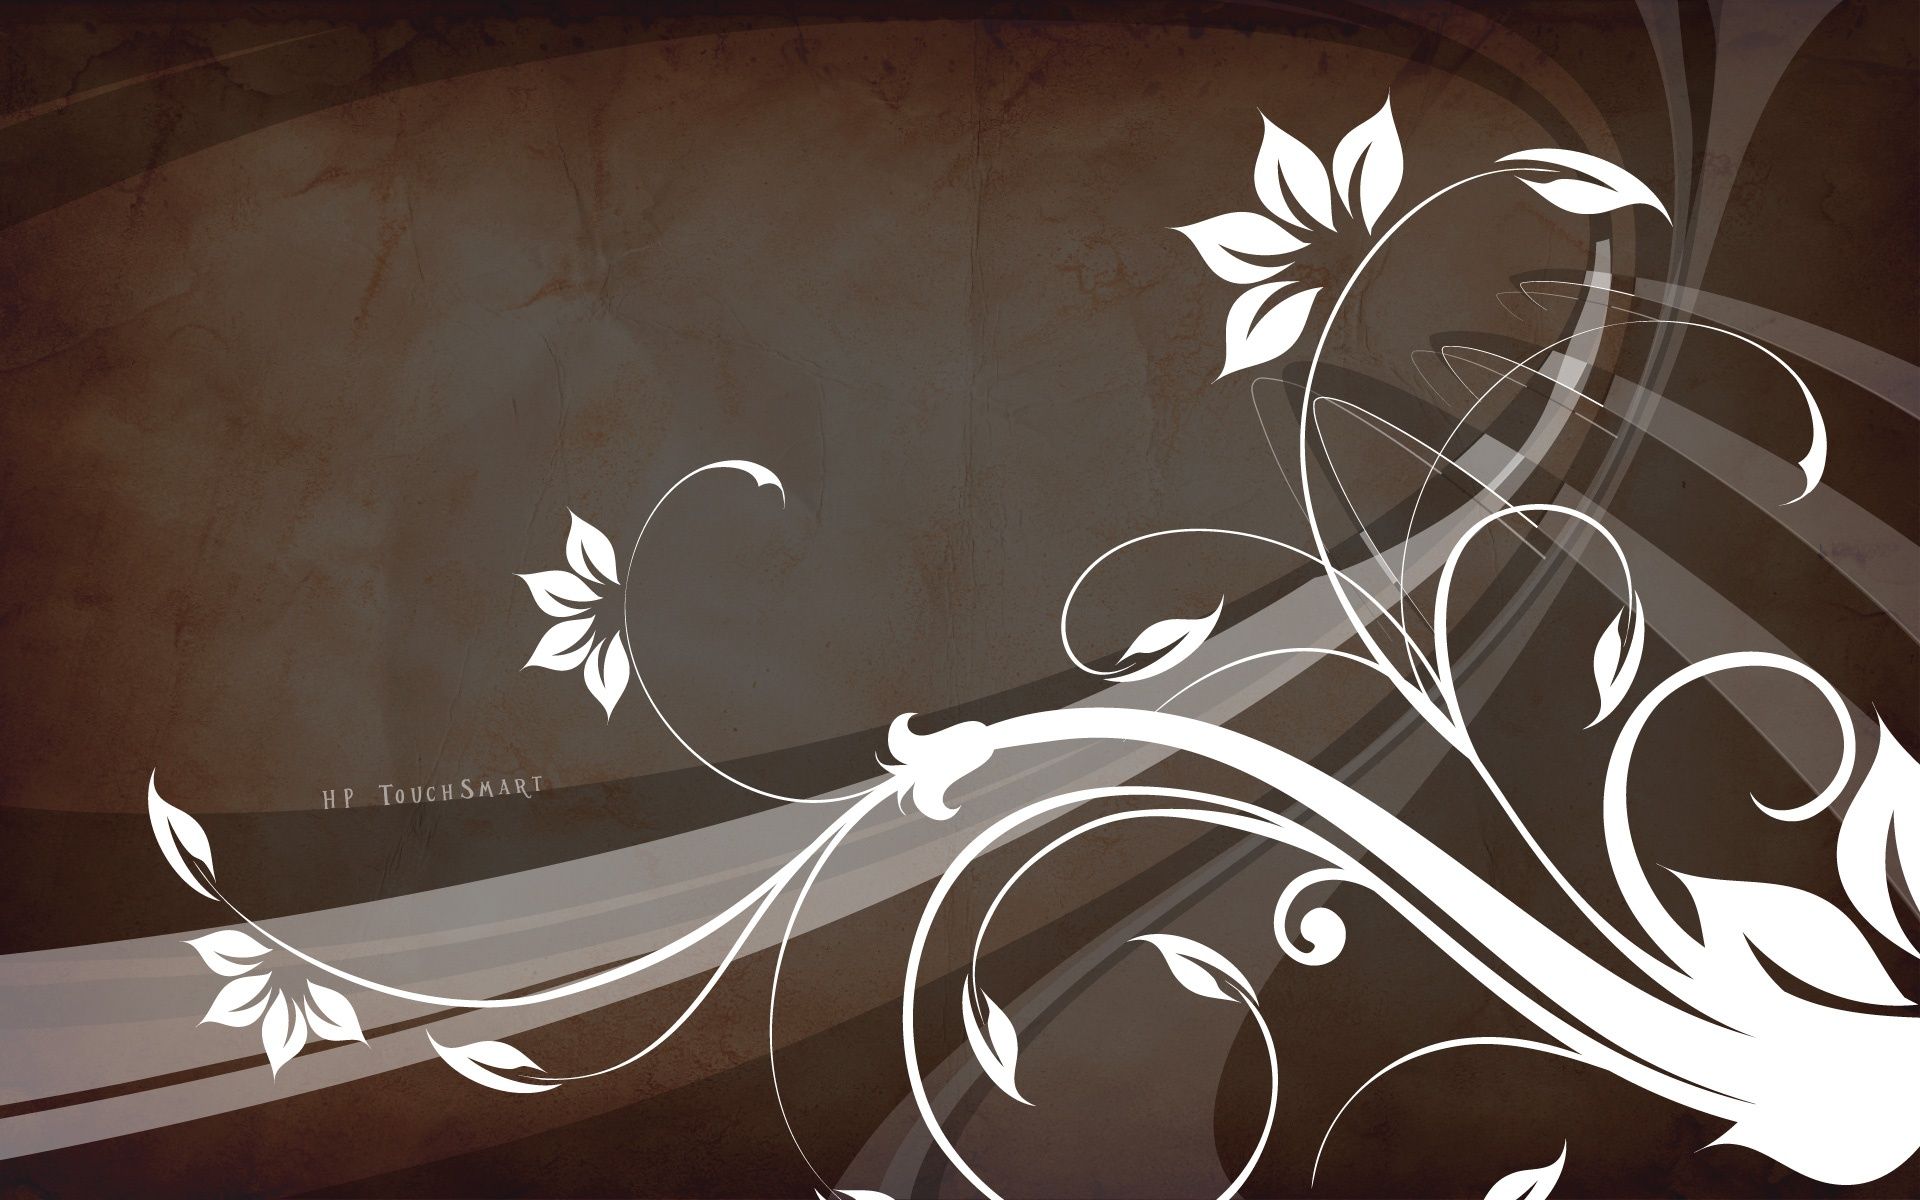 Painting on a gray background wallpapers and images - wallpapers ...